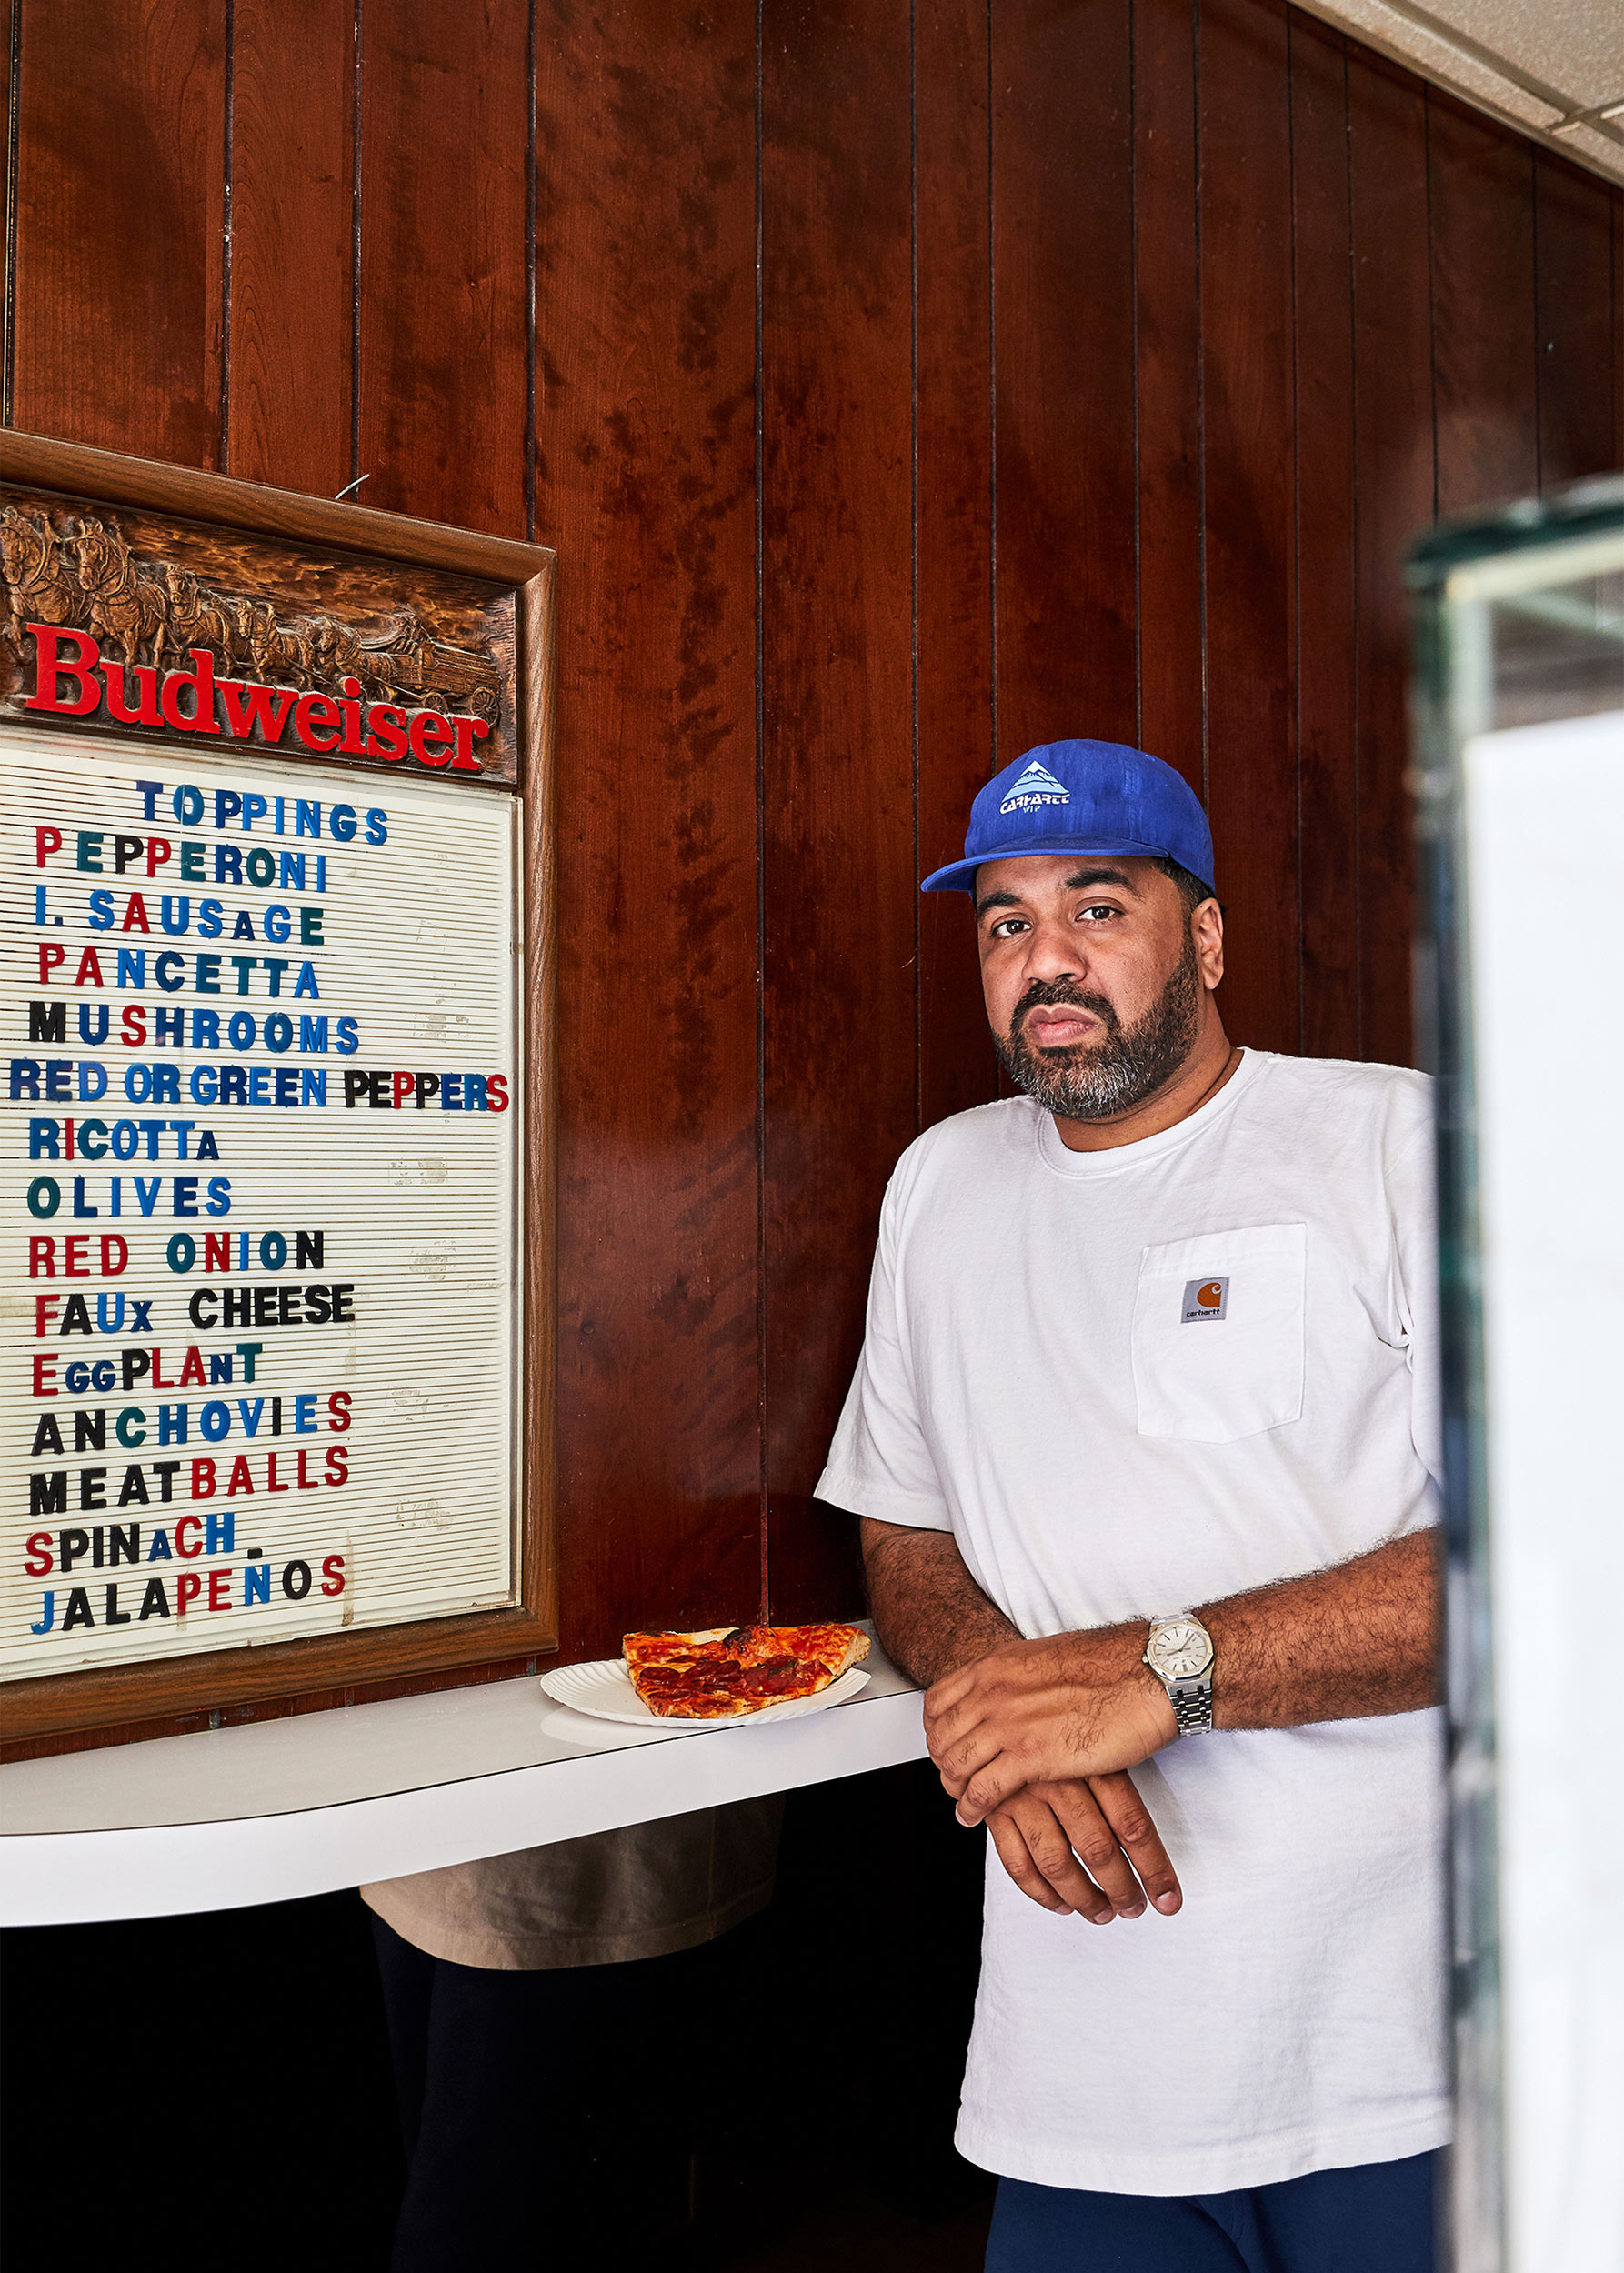 Scarrs Pizza for The Wall Street Journal by editorial photographer Nico Schinco